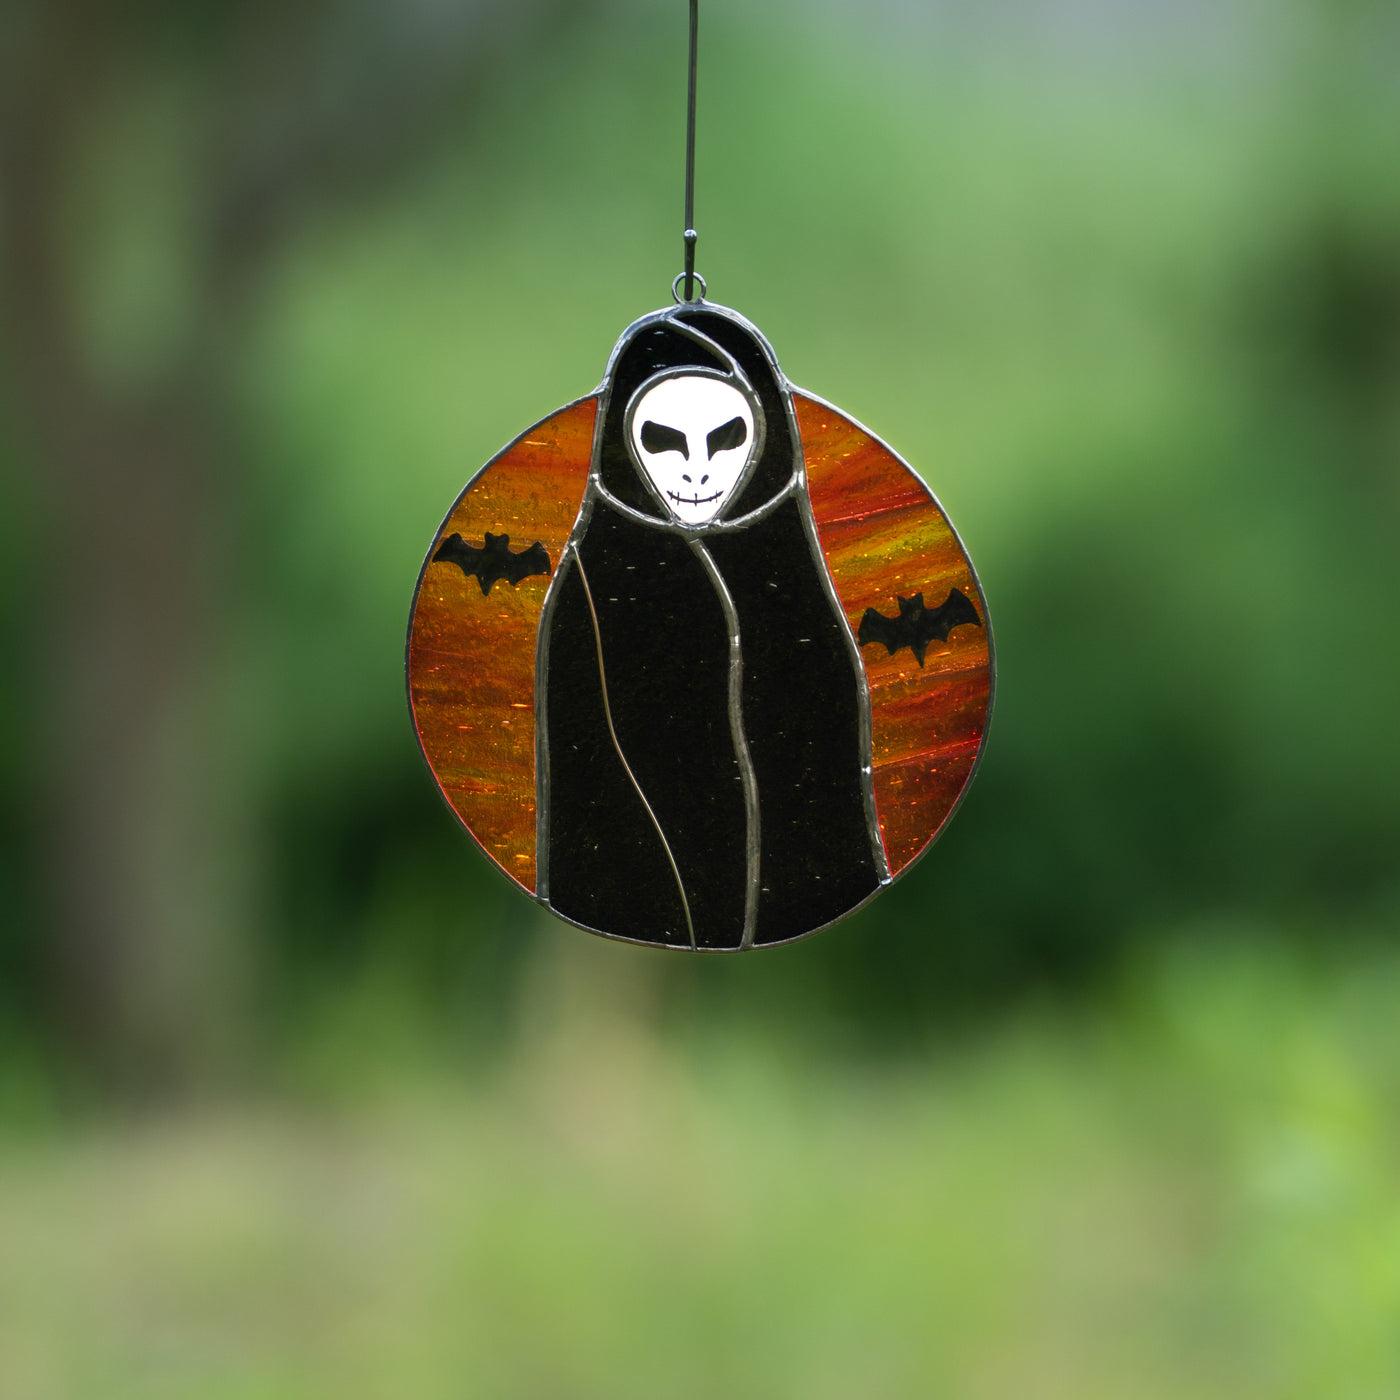 Spooky Grim Reaper with the orange moon and bats on the background suncatcher of stained glass